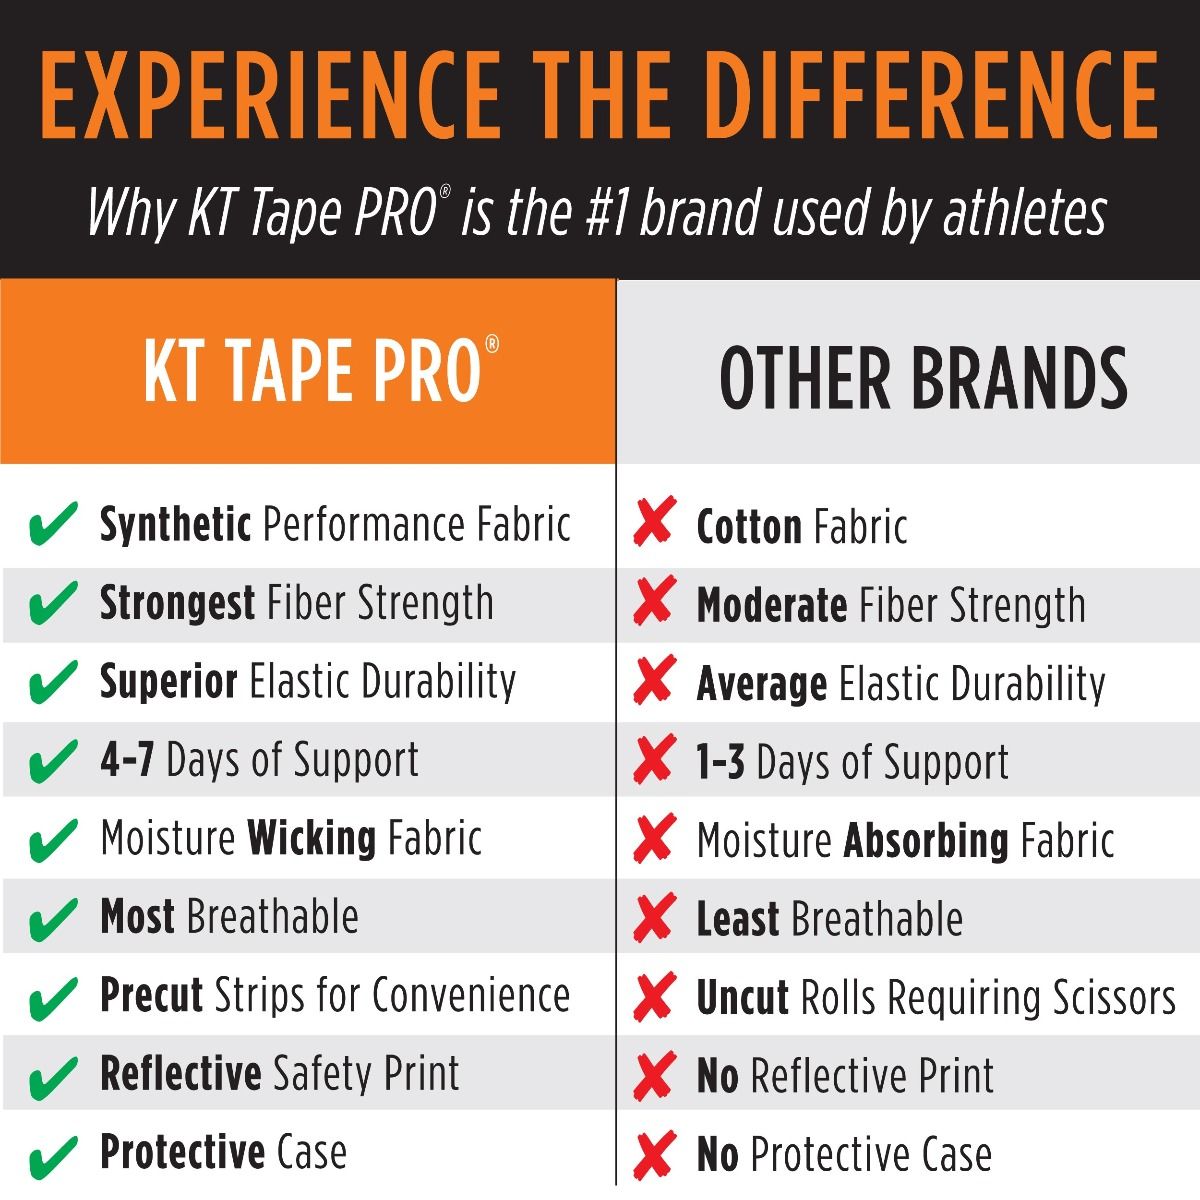 KT Tape Pro® Folds of Honor Special Edition